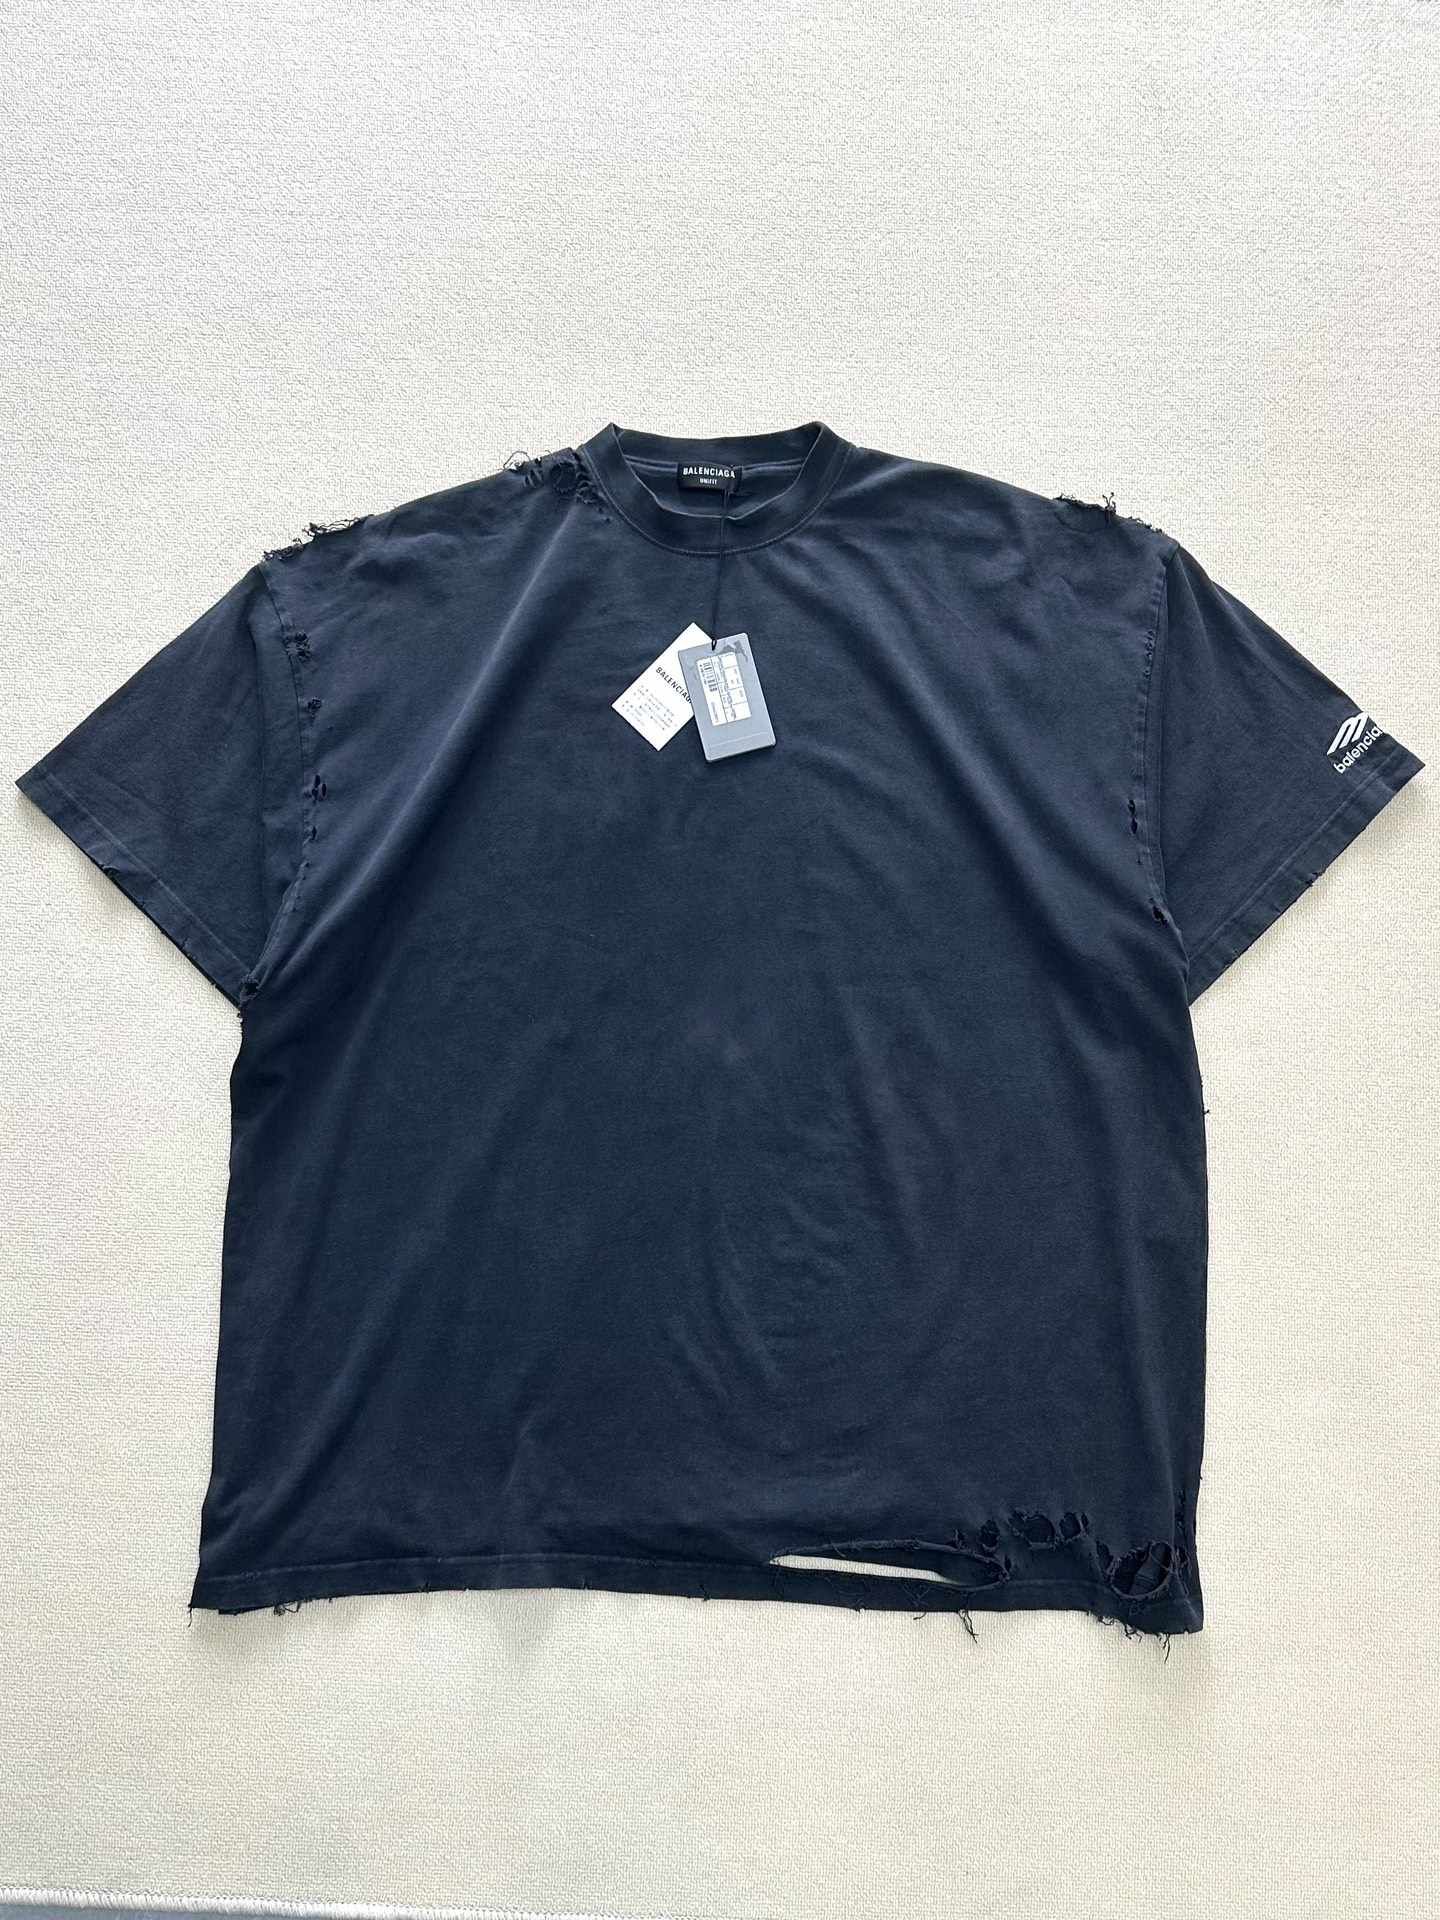 Balenciaga Faded Black 3B Repaired Destroyed Layered T-Shirt - 3